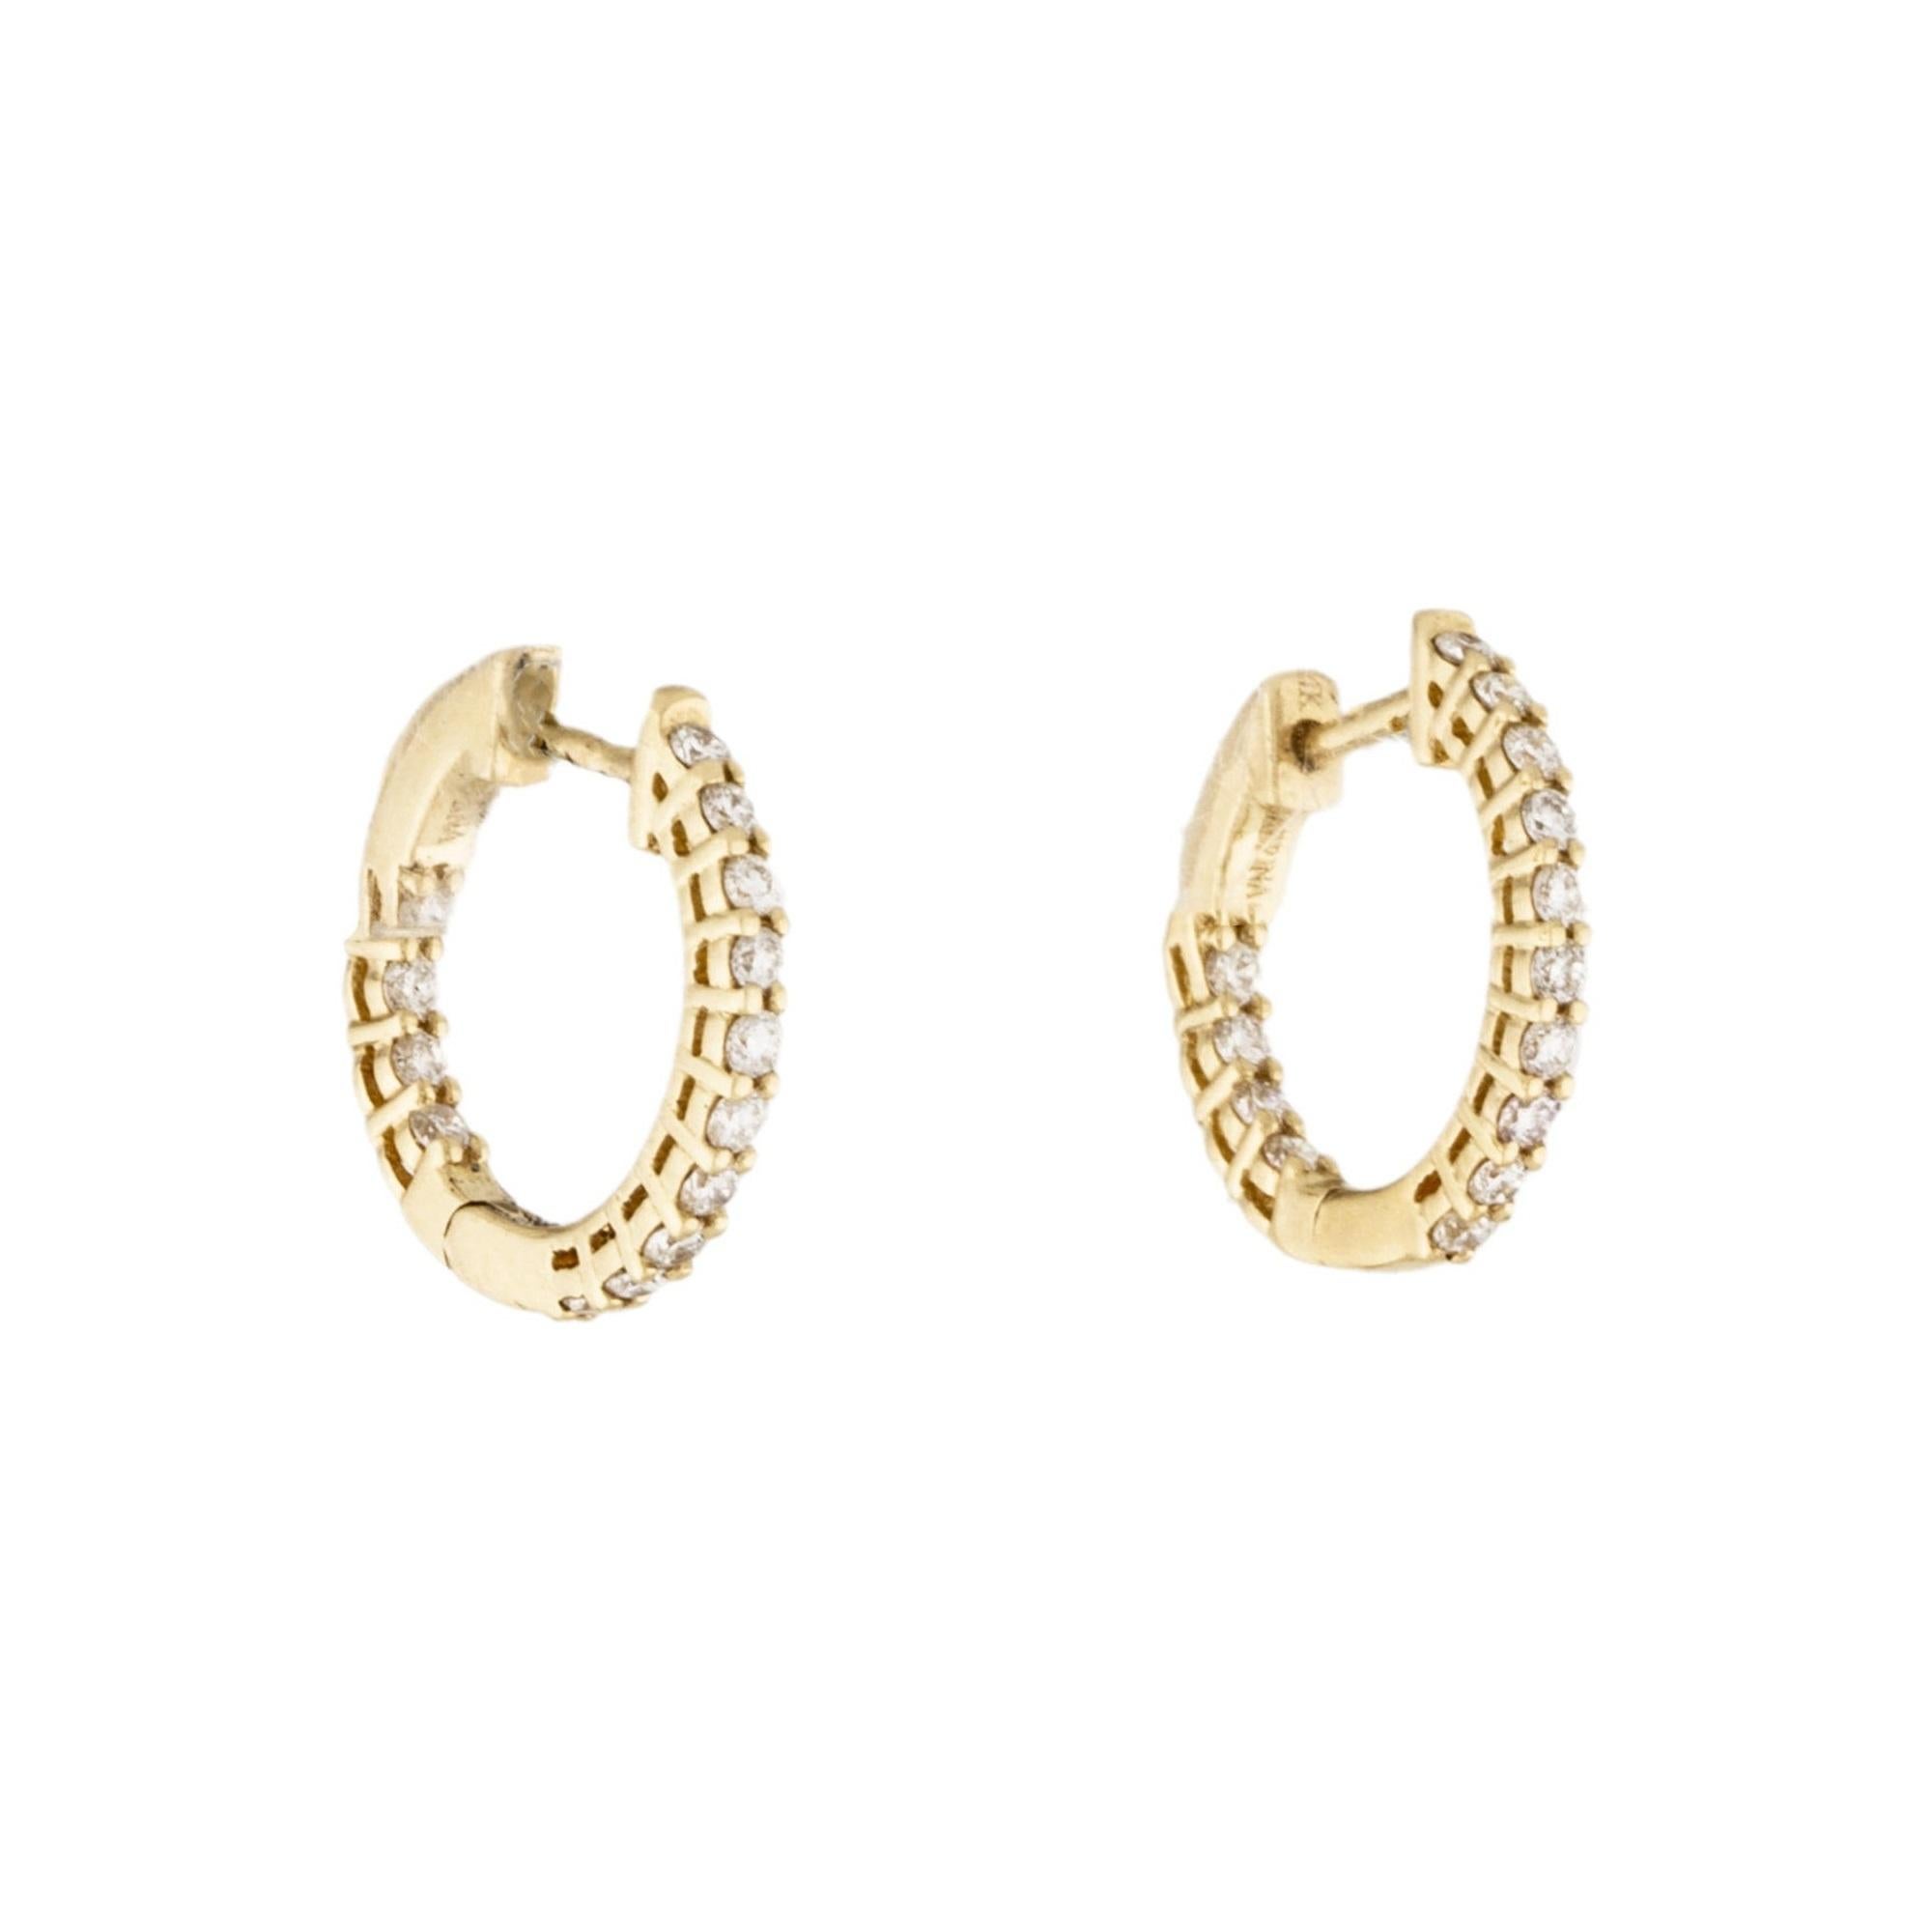 Quality Earrings Set: Made from real 14k gold and 28 glittering natural white approximately 0.50 ct. Certified diamonds, featuring a single line of prong set white diamonds 1/2